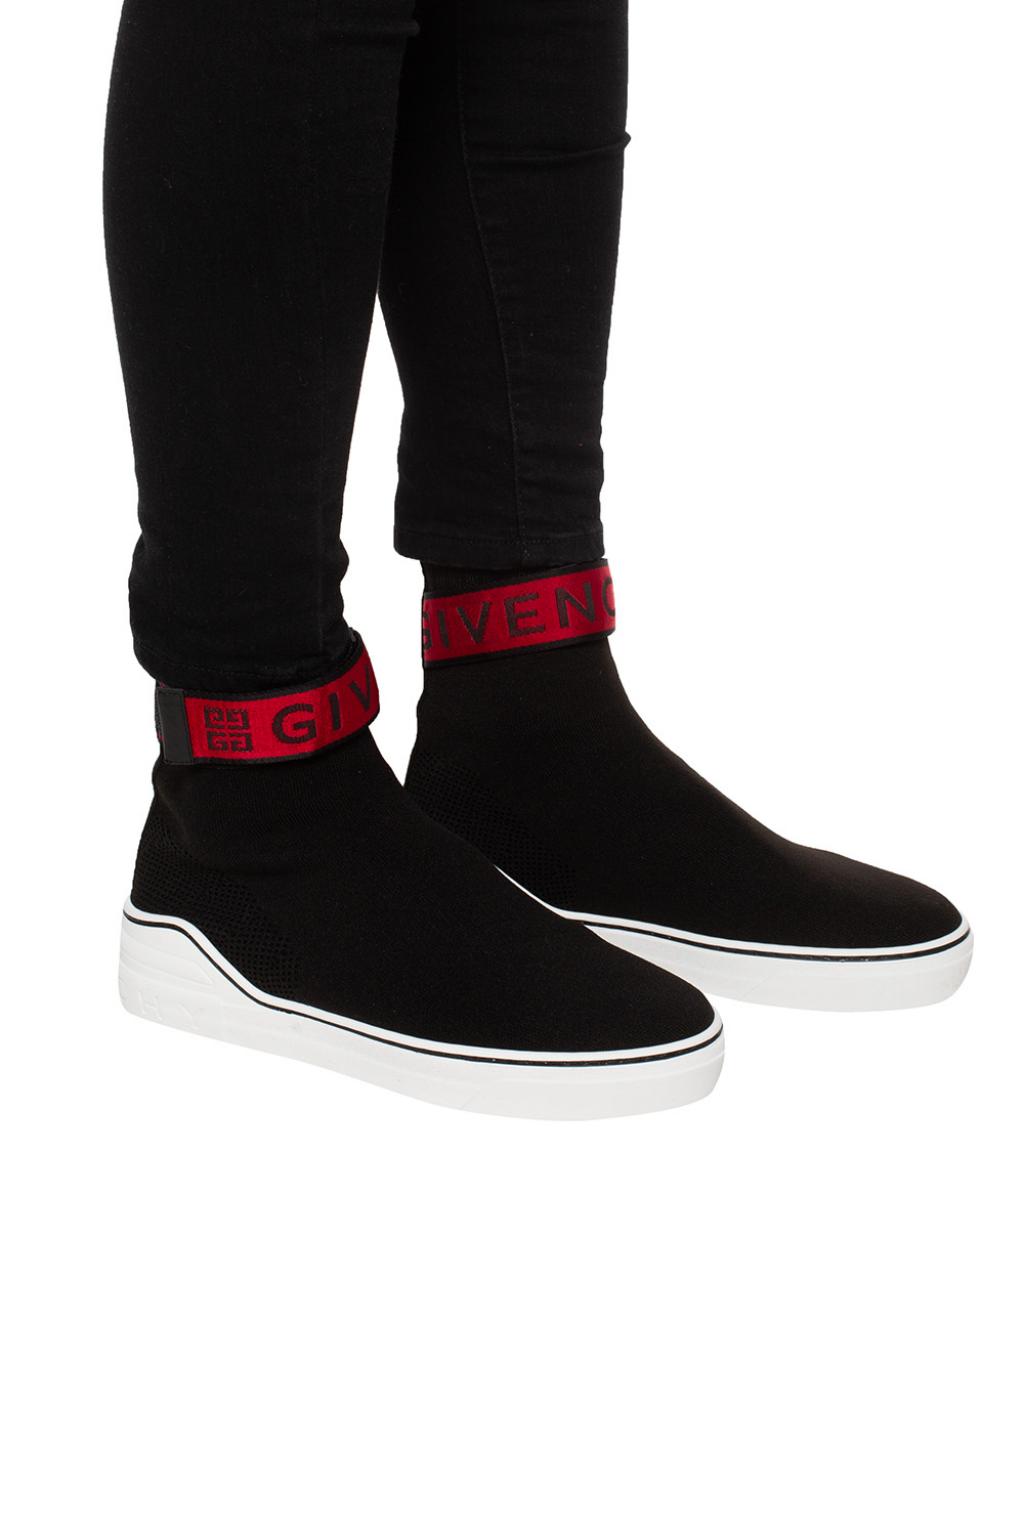 givenchy sock shoes